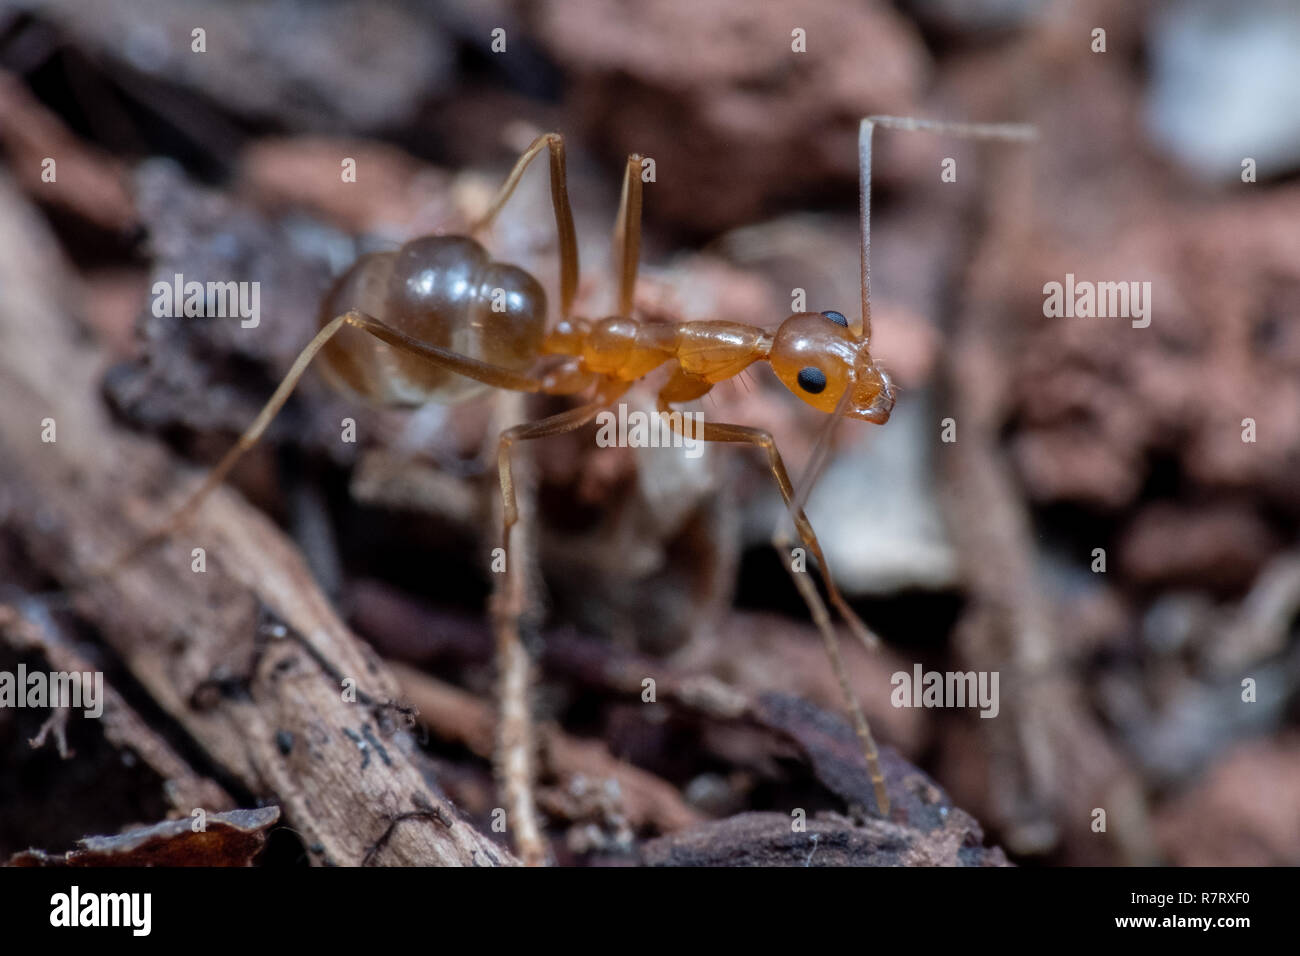 Invasive yellow crazy ants (Anoplolepis gracillipes), one of the world's most damaging invasive species, in Queensland, Australia Stock Photo